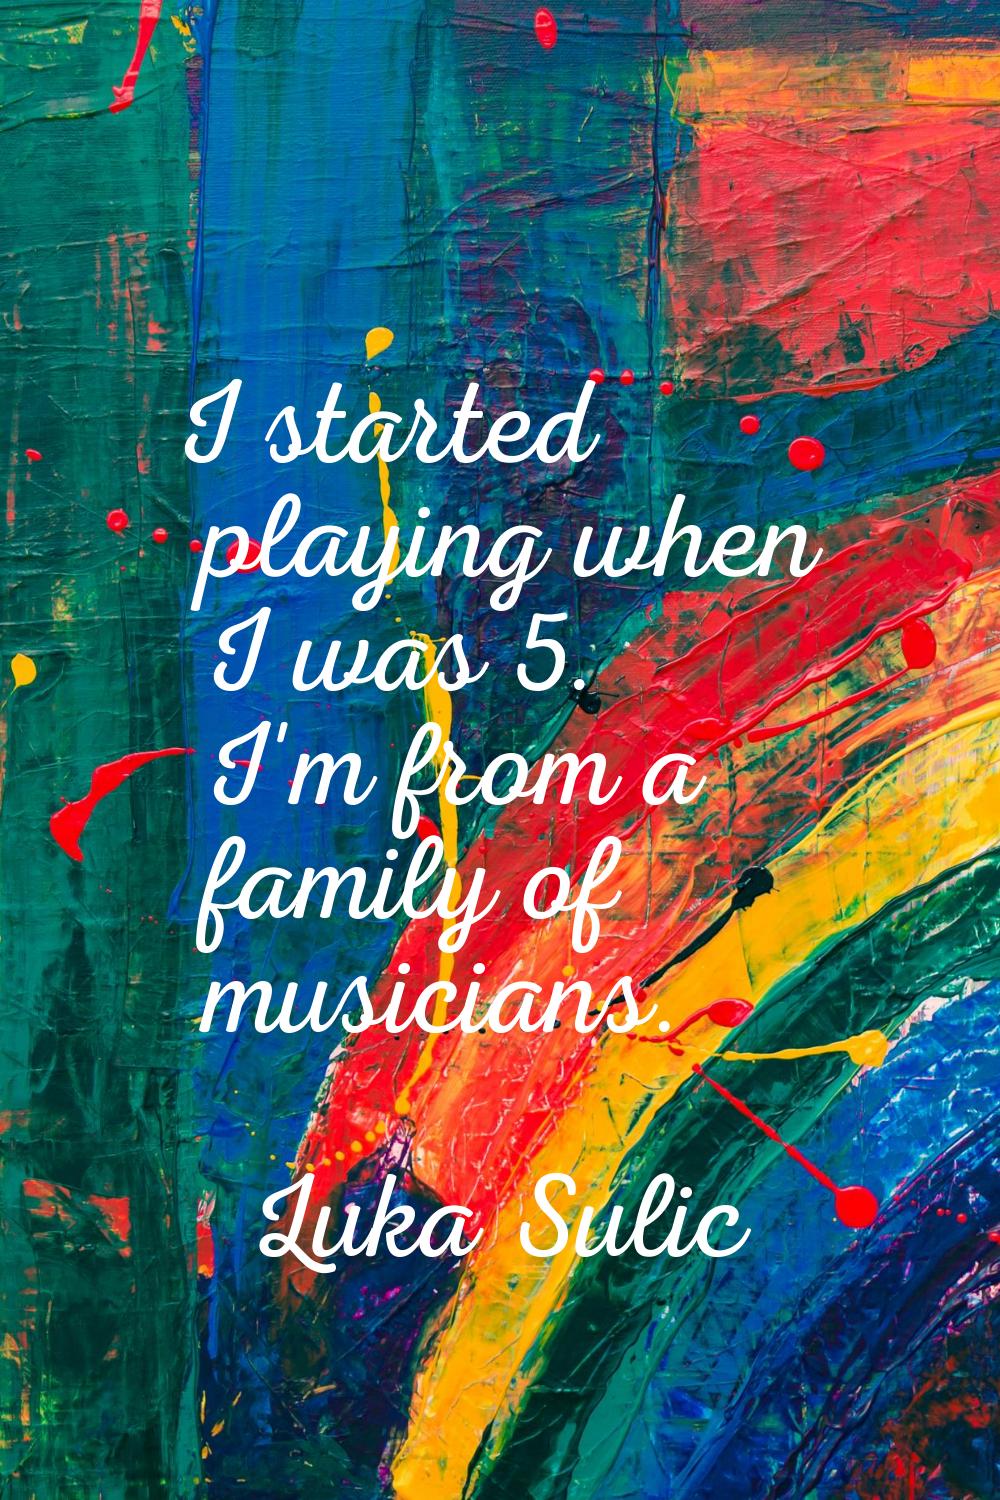 I started playing when I was 5. I'm from a family of musicians.